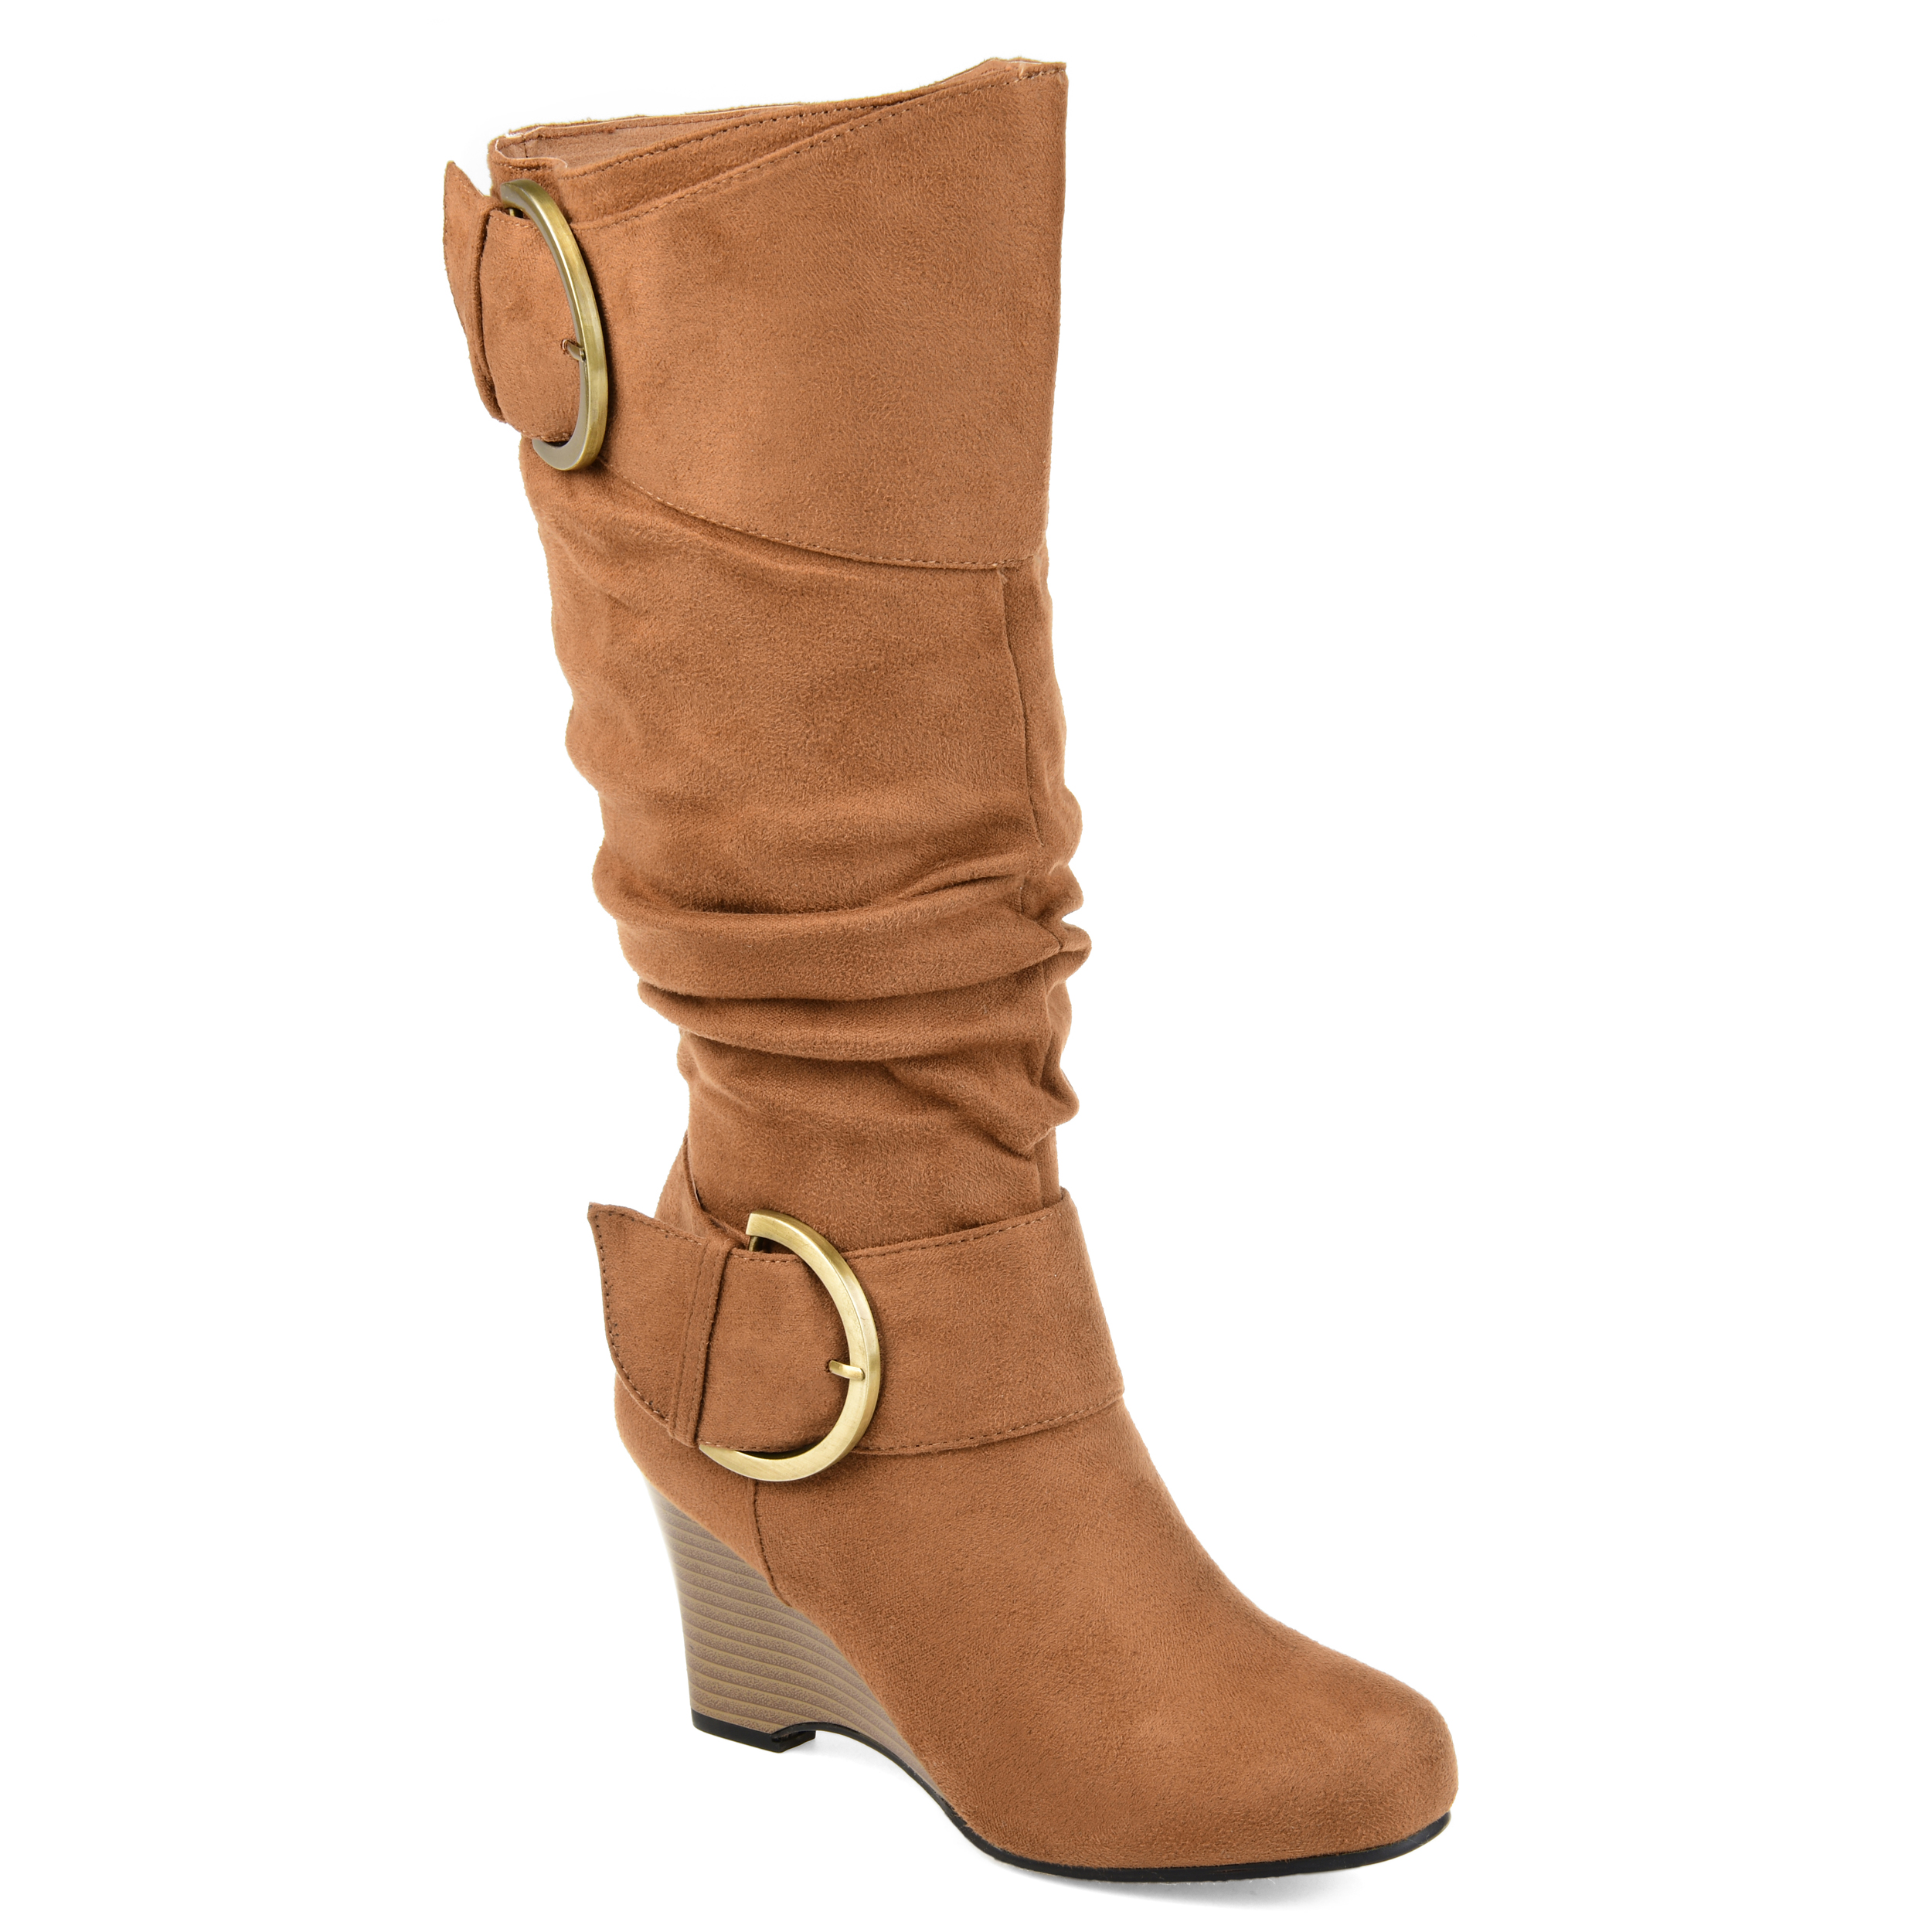 Brinley Co. Women's Faux Suede Buckle Accent Tall Boots - image 1 of 8